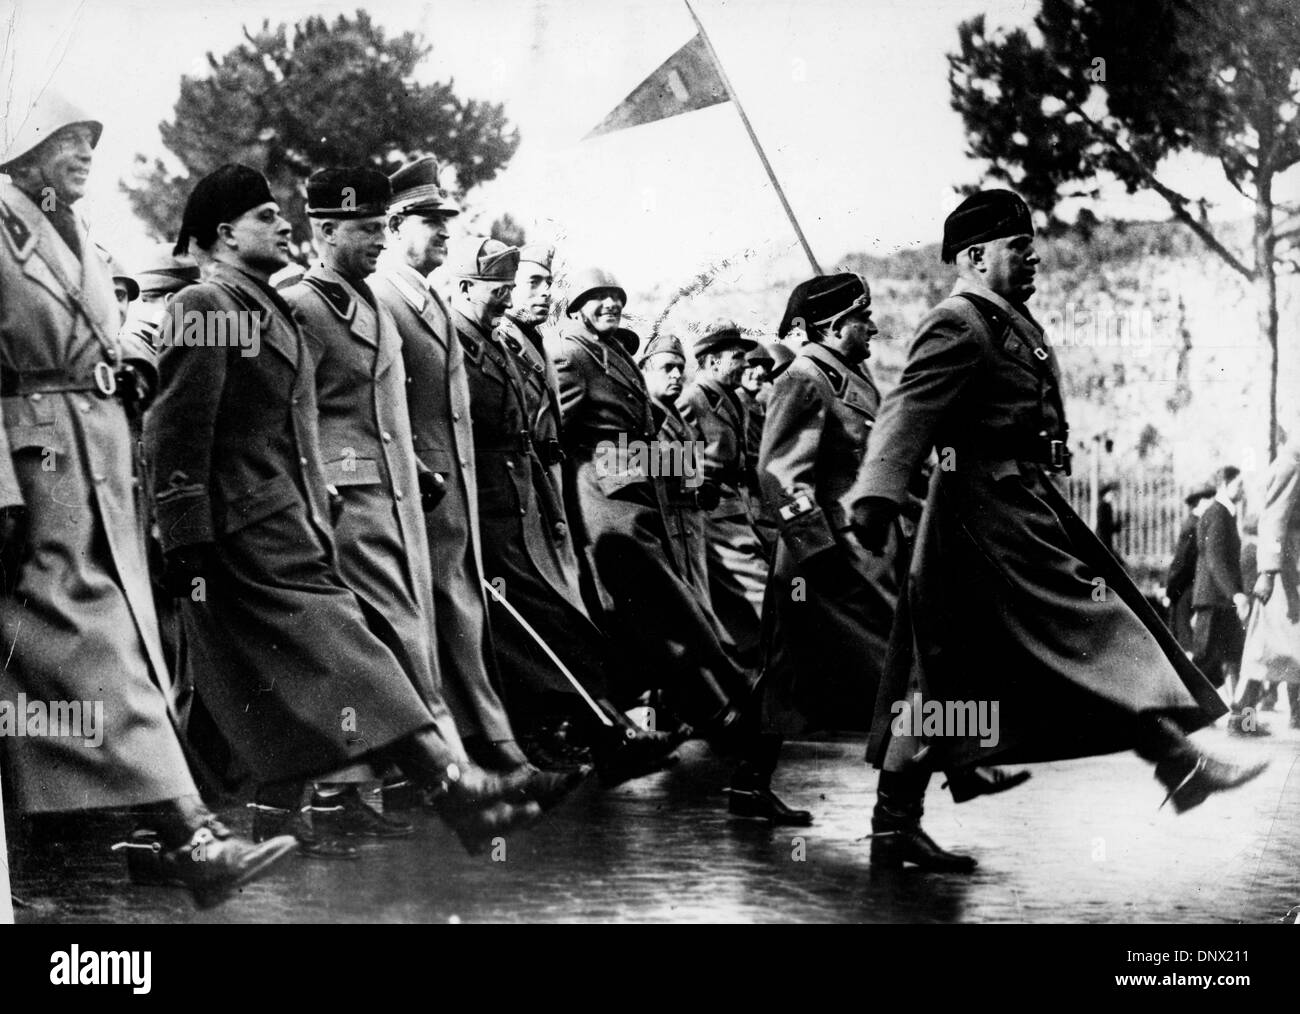 April 8, 1938 - Rome, Italy - BENITO MUSSOLINI (1883-1945) the Italian dictator and leader of the Fascist movement marching an Italian Artillery unit. (Credit Image: © KEYSTONE Pictures/ZUMAPRESS.com) Stock Photo